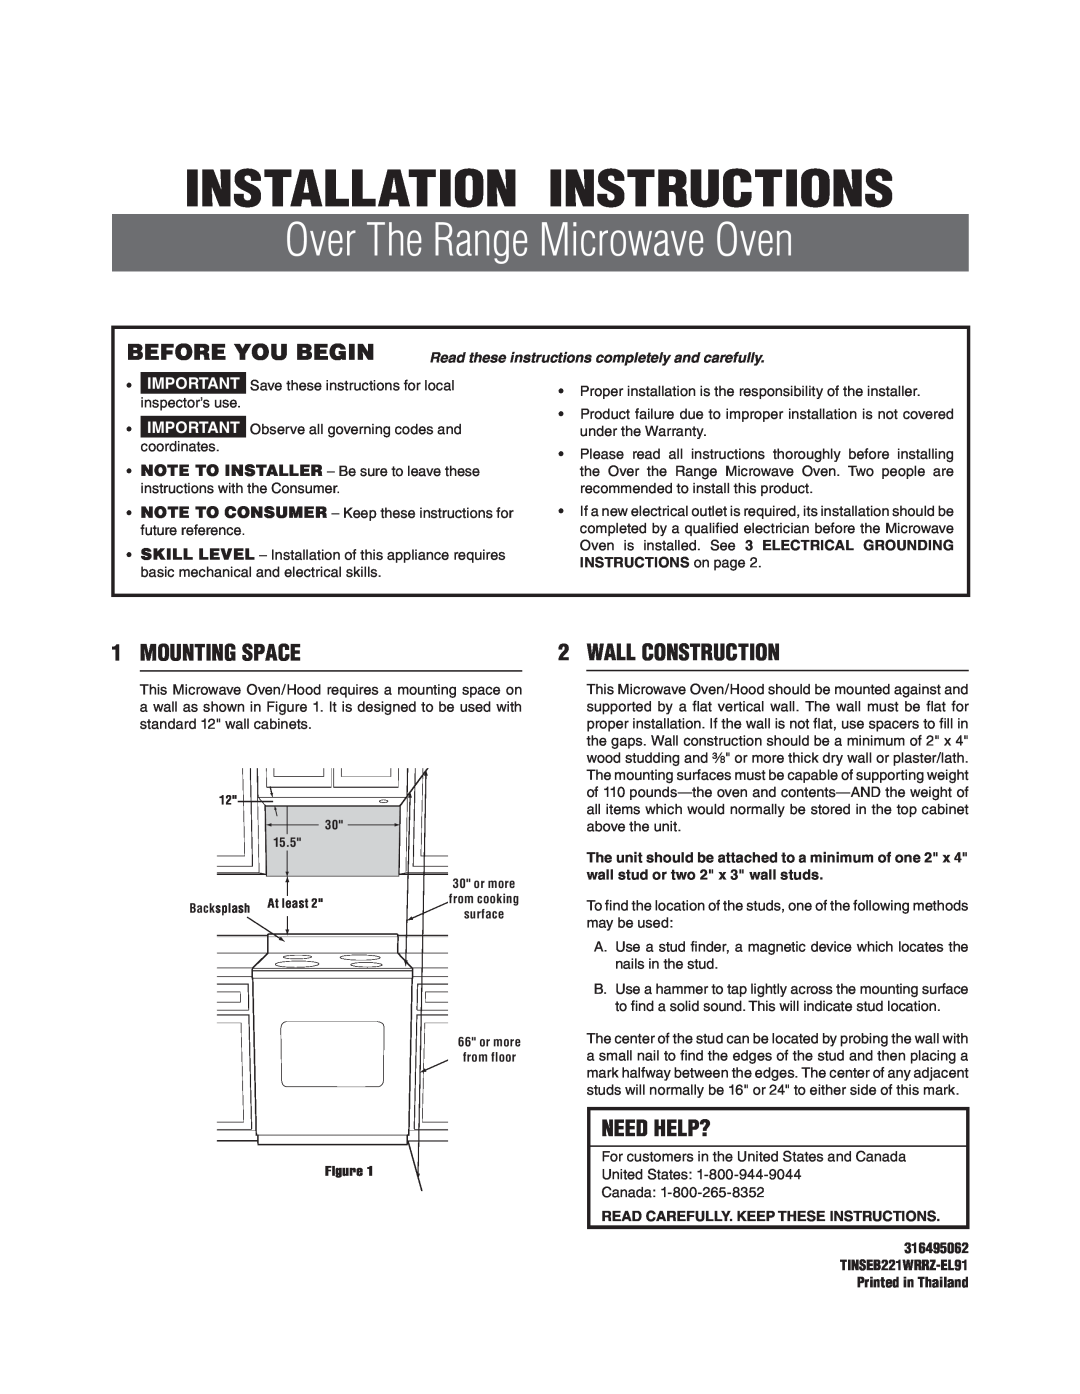 Frigidaire 316495062 installation instructions Before You Begin, Mounting Space, Wall Construction, Need Help? 